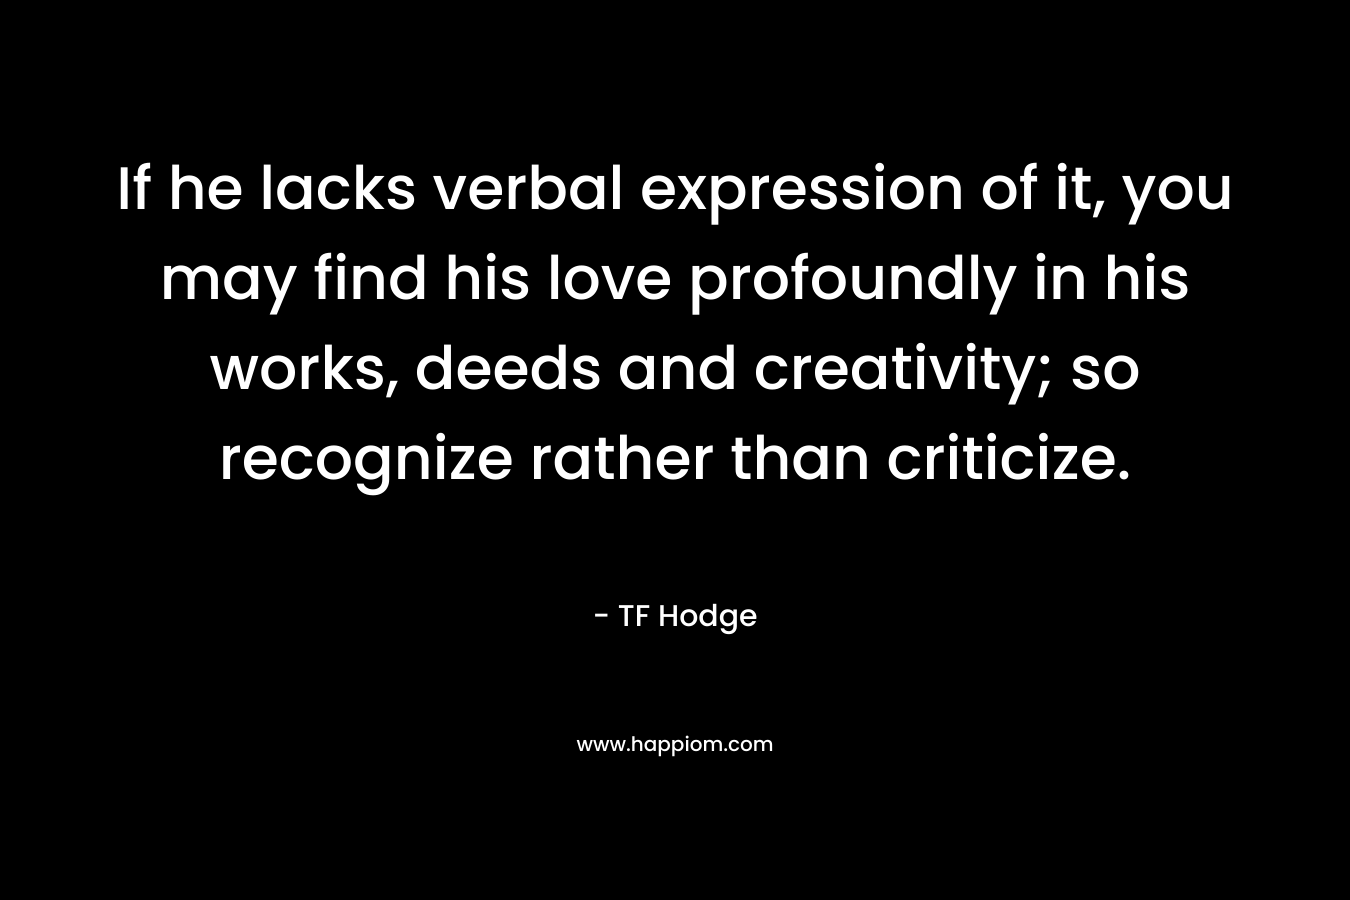 If he lacks verbal expression of it, you may find his love profoundly in his works, deeds and creativity; so recognize rather than criticize. – TF Hodge